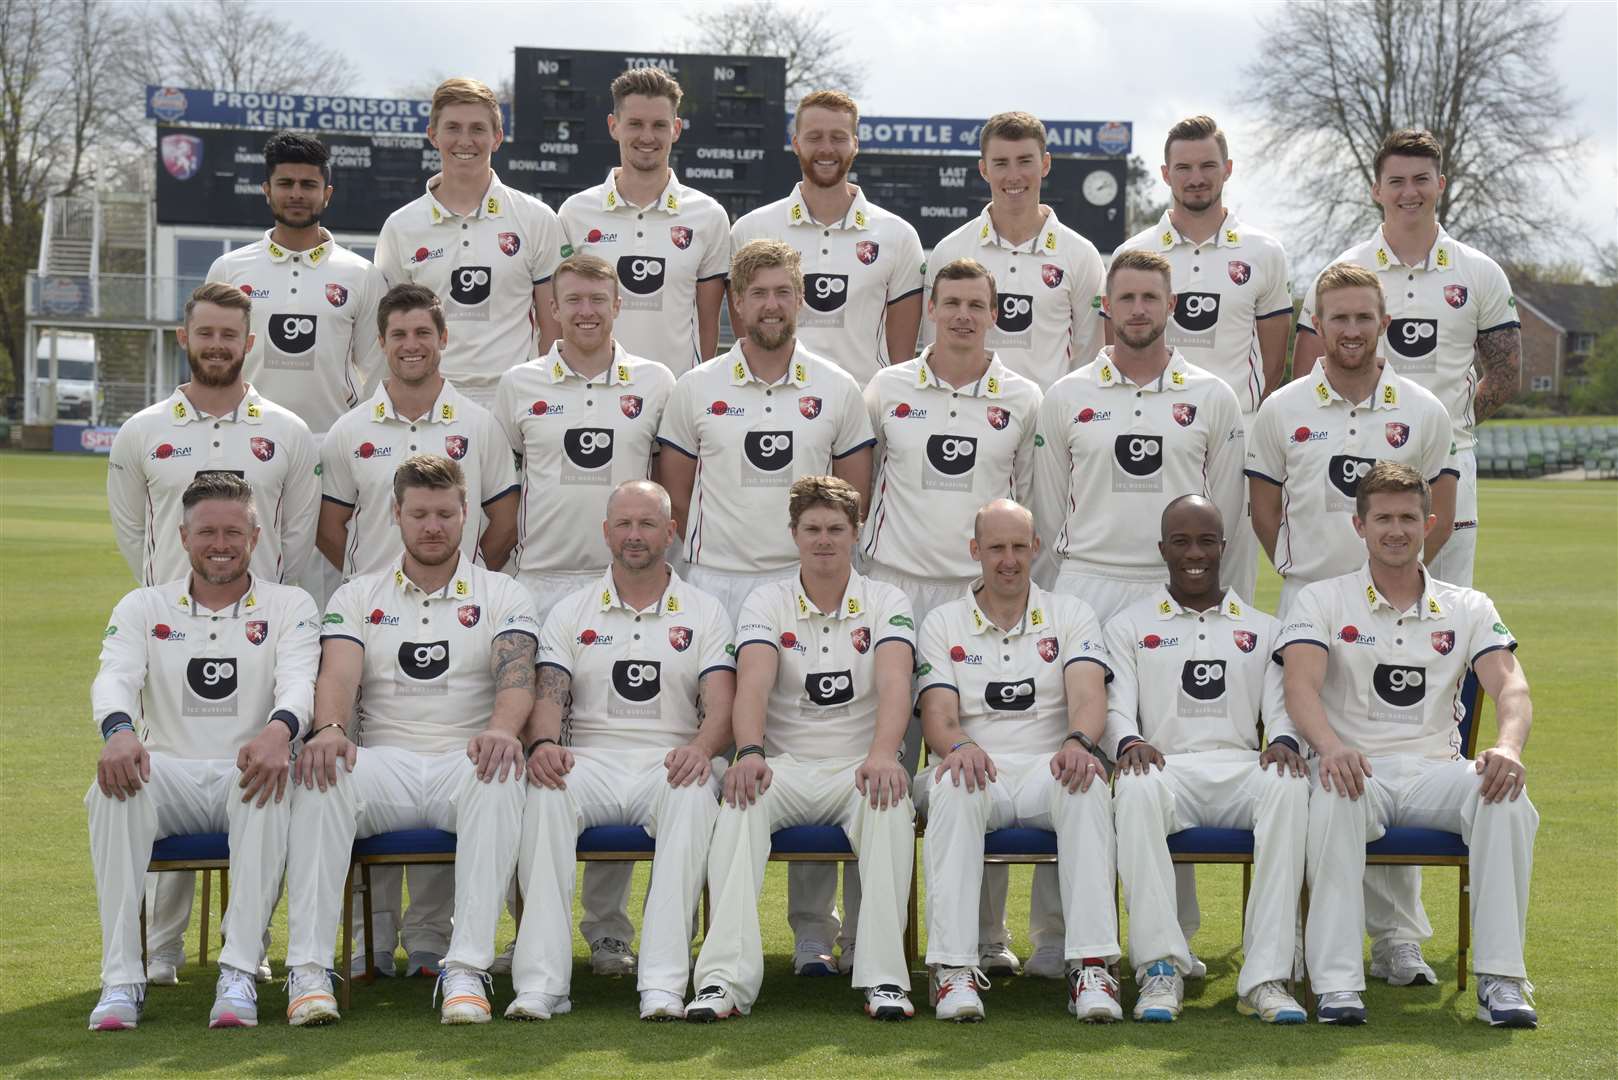 The 2017 Kent Cricket squad with Charlie Hartley pictured in the back row Picture: Chris Davey